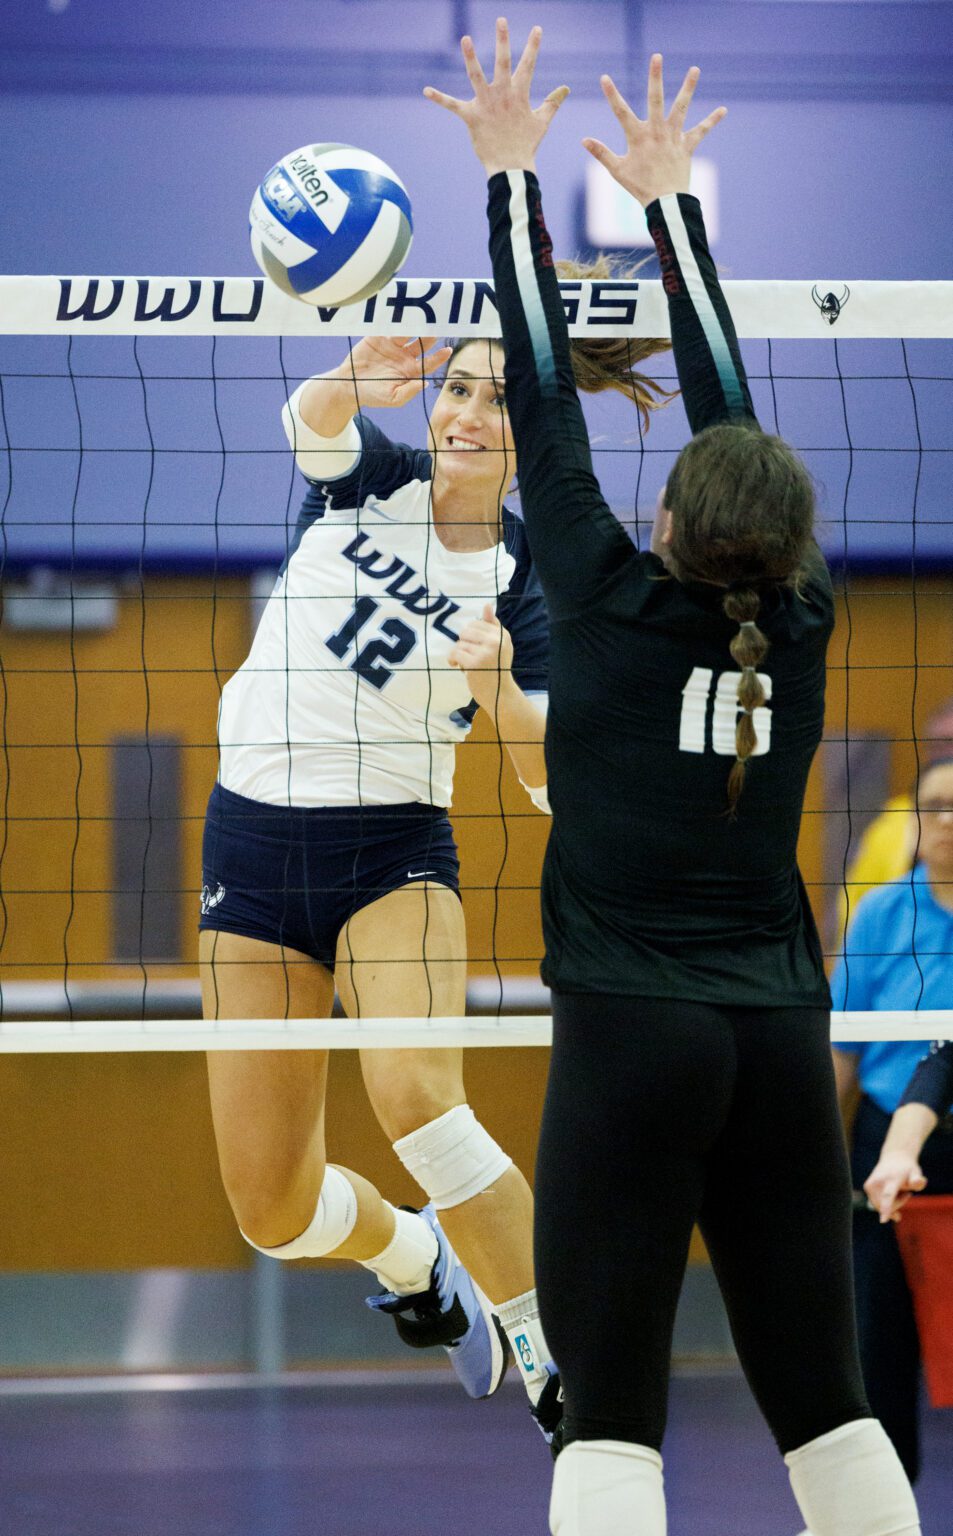 Western Washington University's Chloe Roetcisoender gets a kill in the fourth game as Western beat Central Washington University 3-1 in sets on Sept. 29.